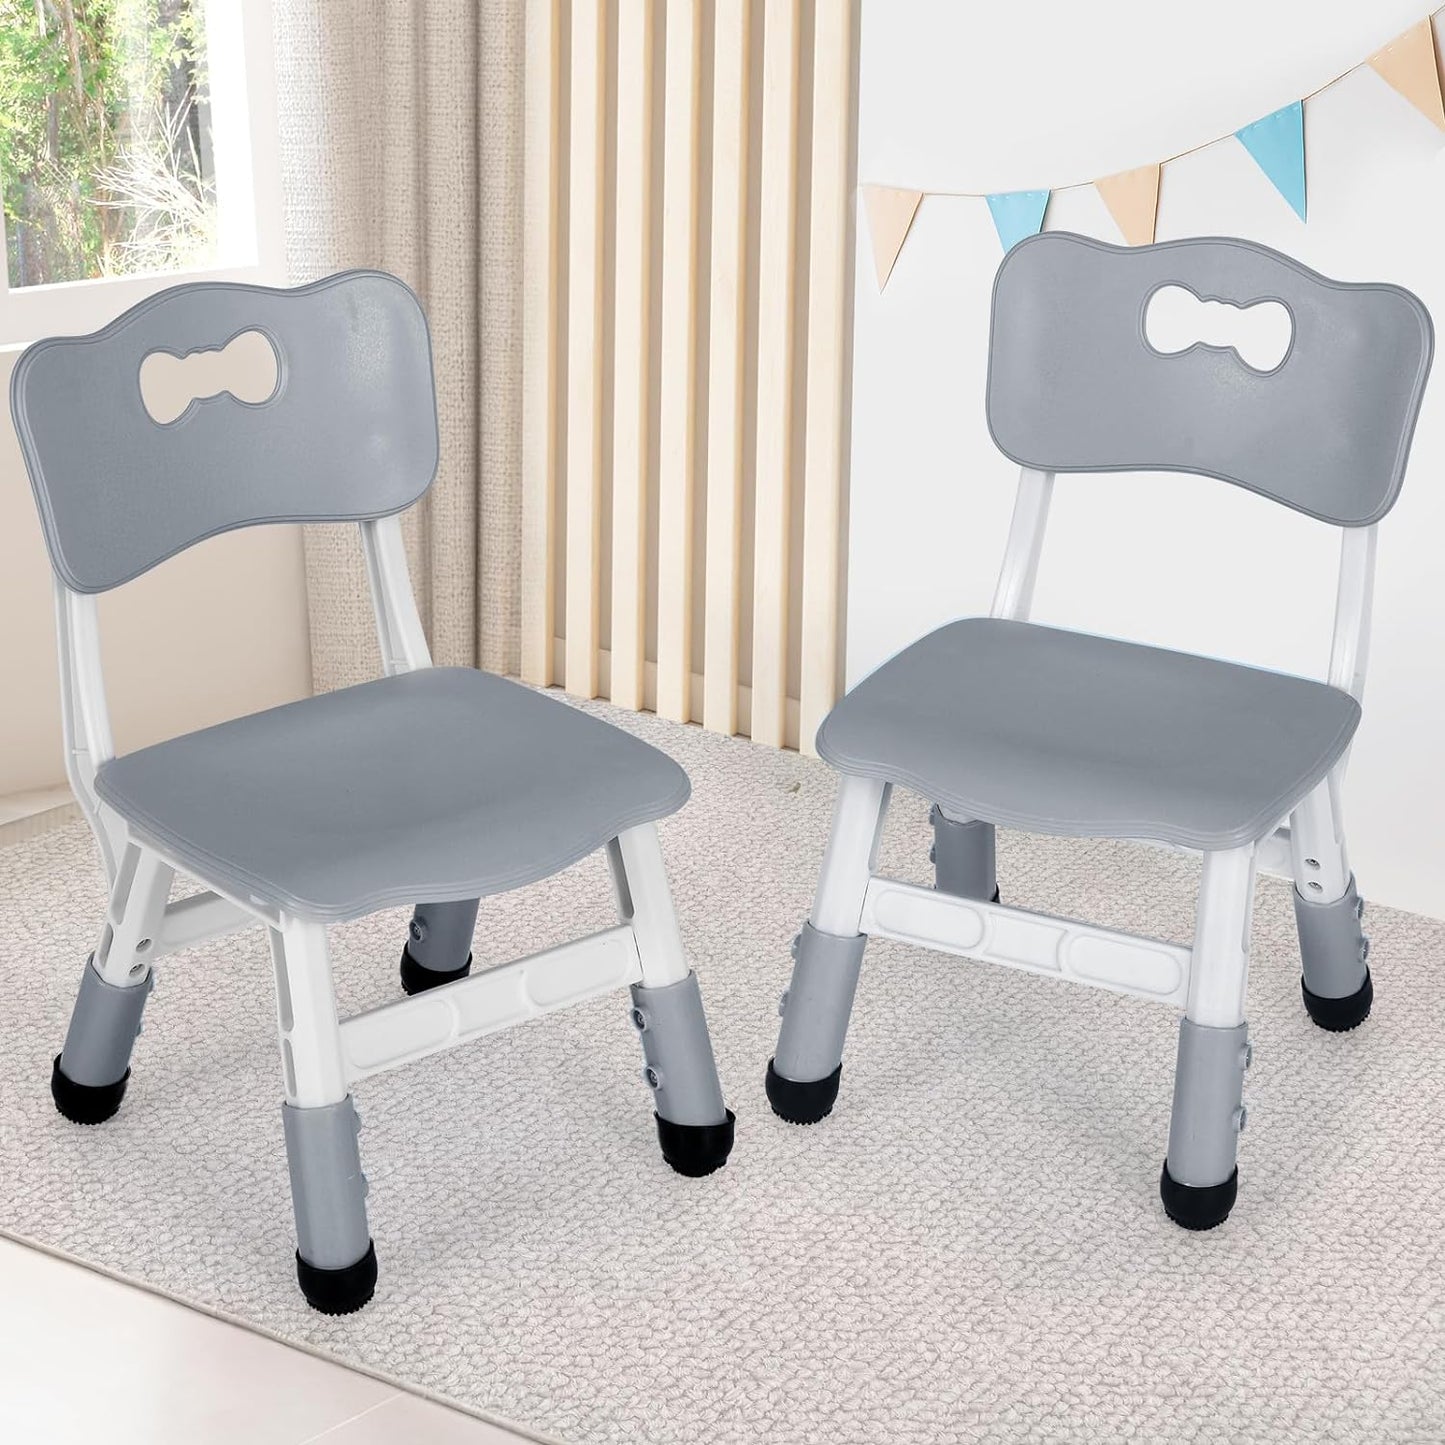 Arlopu 2pcs Adjustable Kids Chair, 3 Levels Adjustable Stackable Toddler Chairs, Maximum Load-Bearing 220Lb, Ergonomic Children Seats for Classroom/Daycare/Familiy